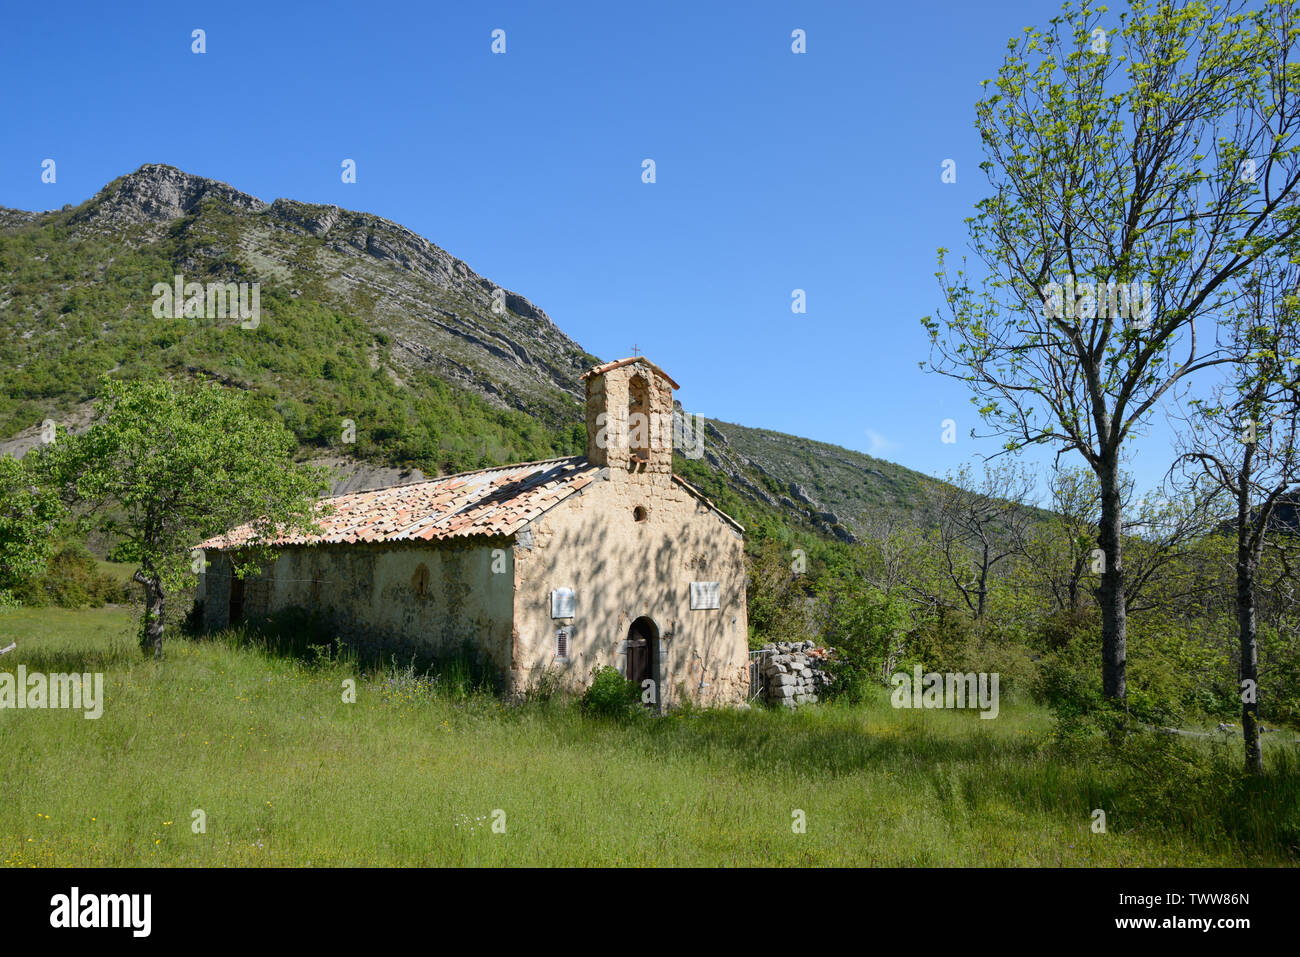 Chapel at La Melle, a former village destroyed by the German Army during the Second World War, in the Alpes-de-Haute-Provence Provence France Stock Photo